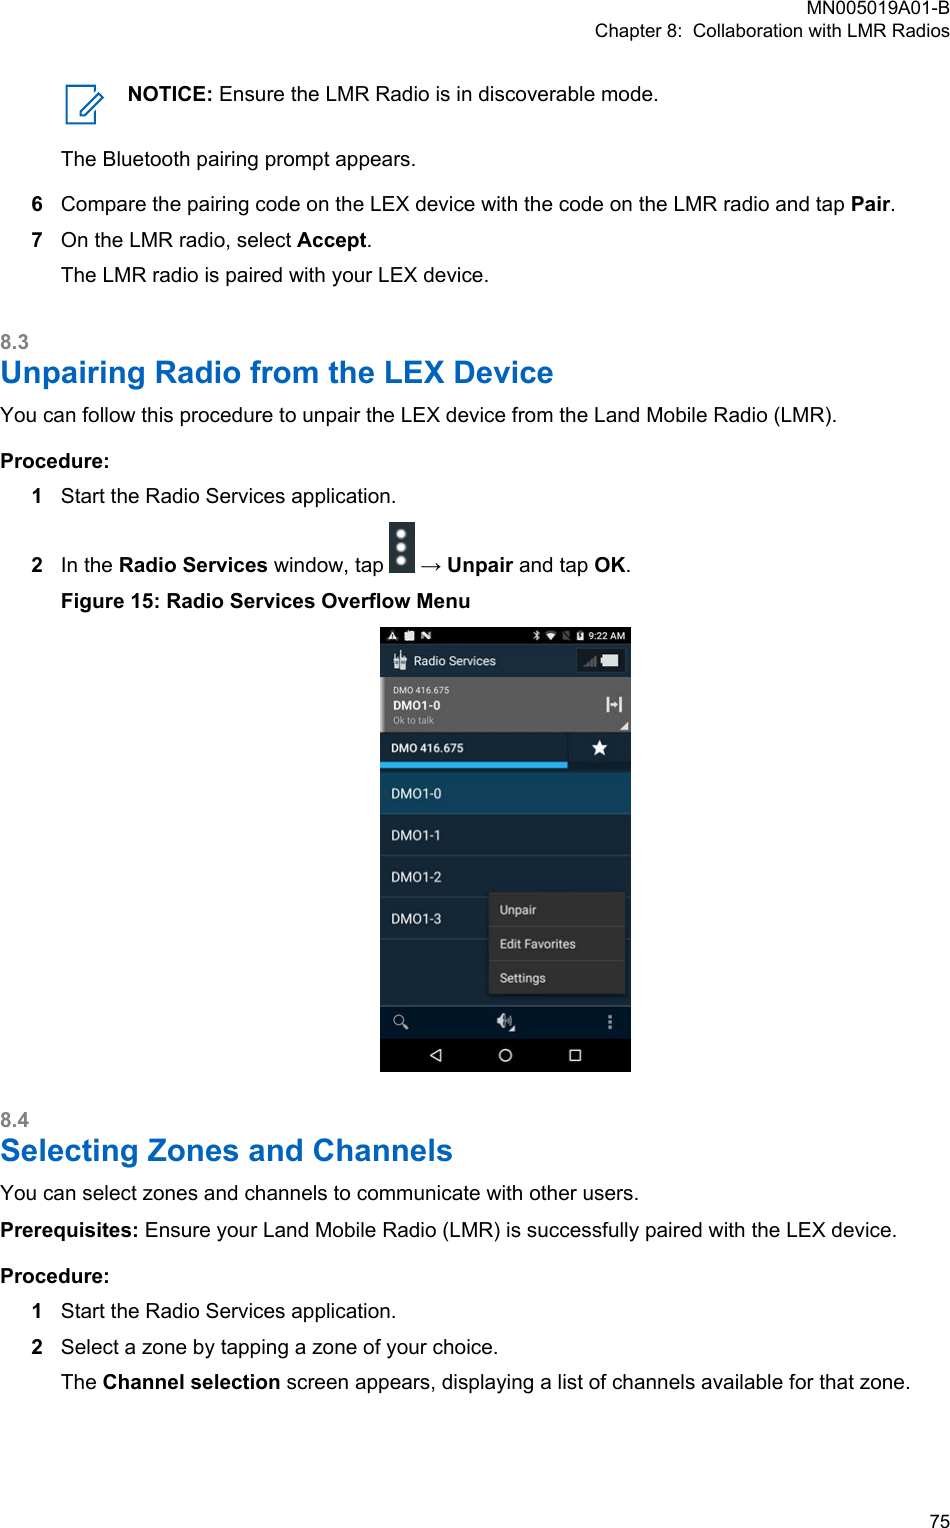 NOTICE: Ensure the LMR Radio is in discoverable mode.The Bluetooth pairing prompt appears.6Compare the pairing code on the LEX device with the code on the LMR radio and tap Pair.7On the LMR radio, select Accept.The LMR radio is paired with your LEX device.8.3Unpairing Radio from the LEX DeviceYou can follow this procedure to unpair the LEX device from the Land Mobile Radio (LMR).Procedure:1Start the Radio Services application.2In the Radio Services window, tap   → Unpair and tap OK.Figure 15: Radio Services Overflow Menu8.4Selecting Zones and ChannelsYou can select zones and channels to communicate with other users.Prerequisites: Ensure your Land Mobile Radio (LMR) is successfully paired with the LEX device.Procedure:1Start the Radio Services application.2Select a zone by tapping a zone of your choice.The Channel selection screen appears, displaying a list of channels available for that zone.MN005019A01-BChapter 8:  Collaboration with LMR Radios  75